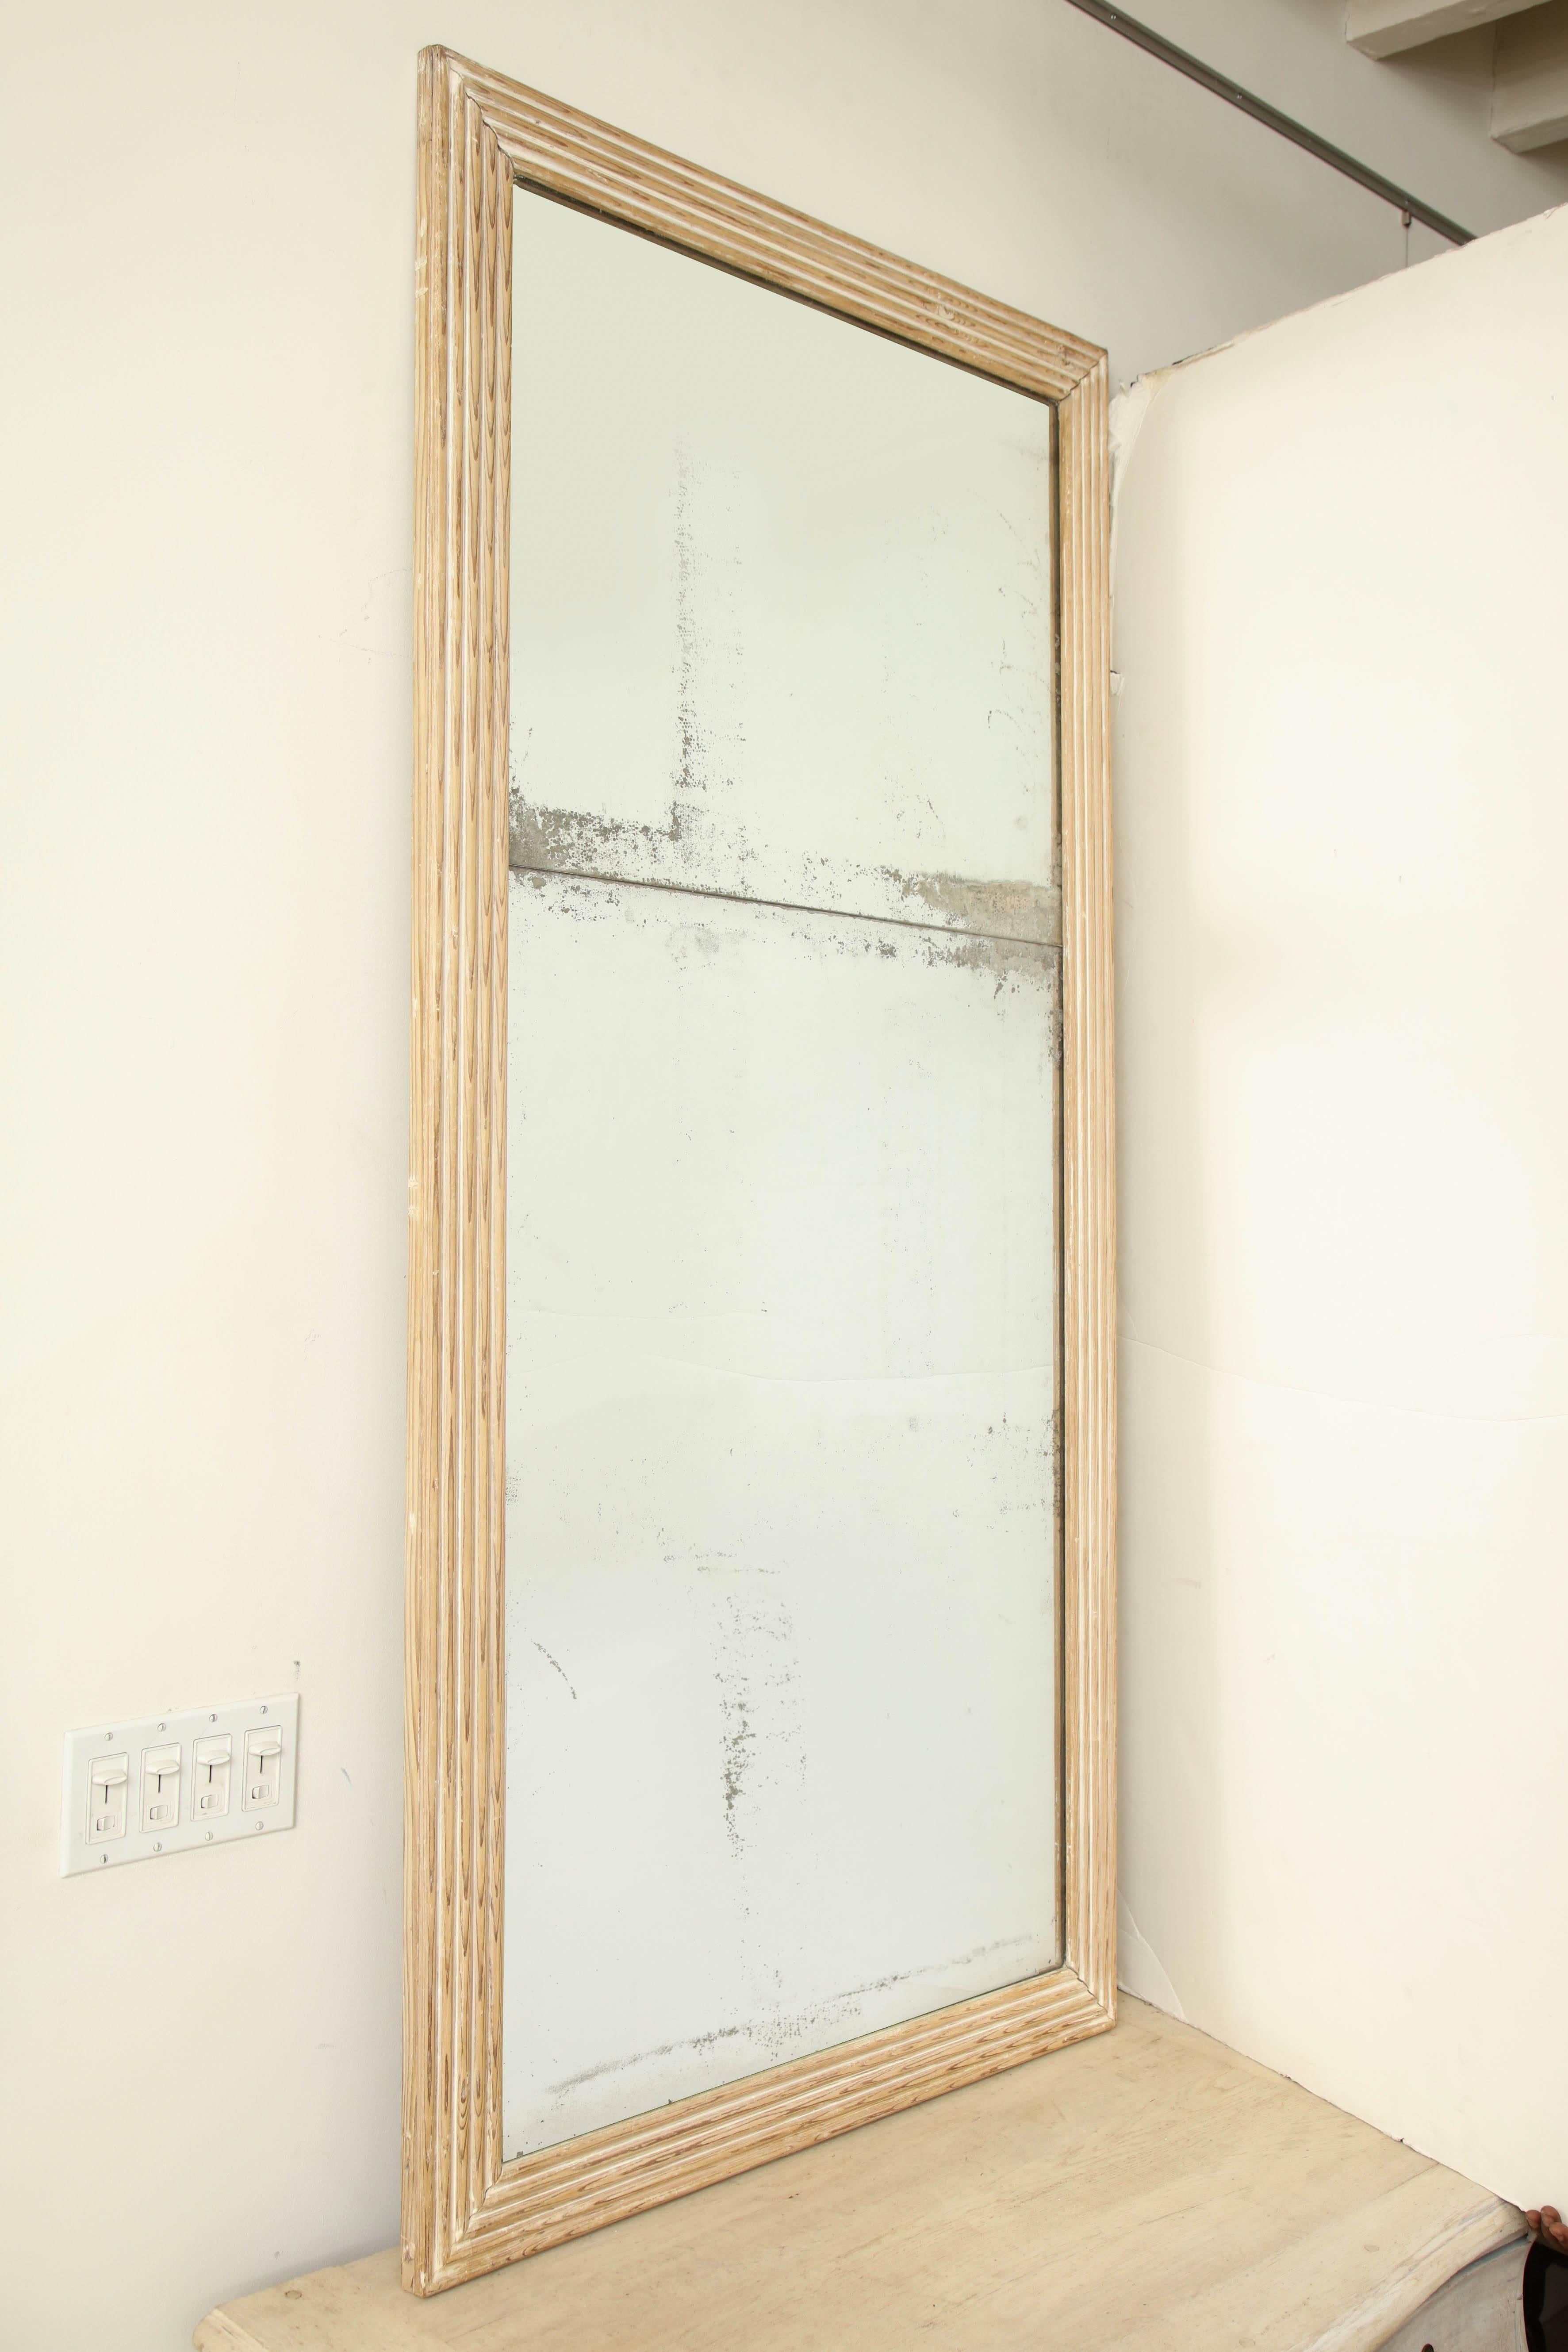 19th century French ribbed and lightly cerused wood mirror with original glass, circa 1830.